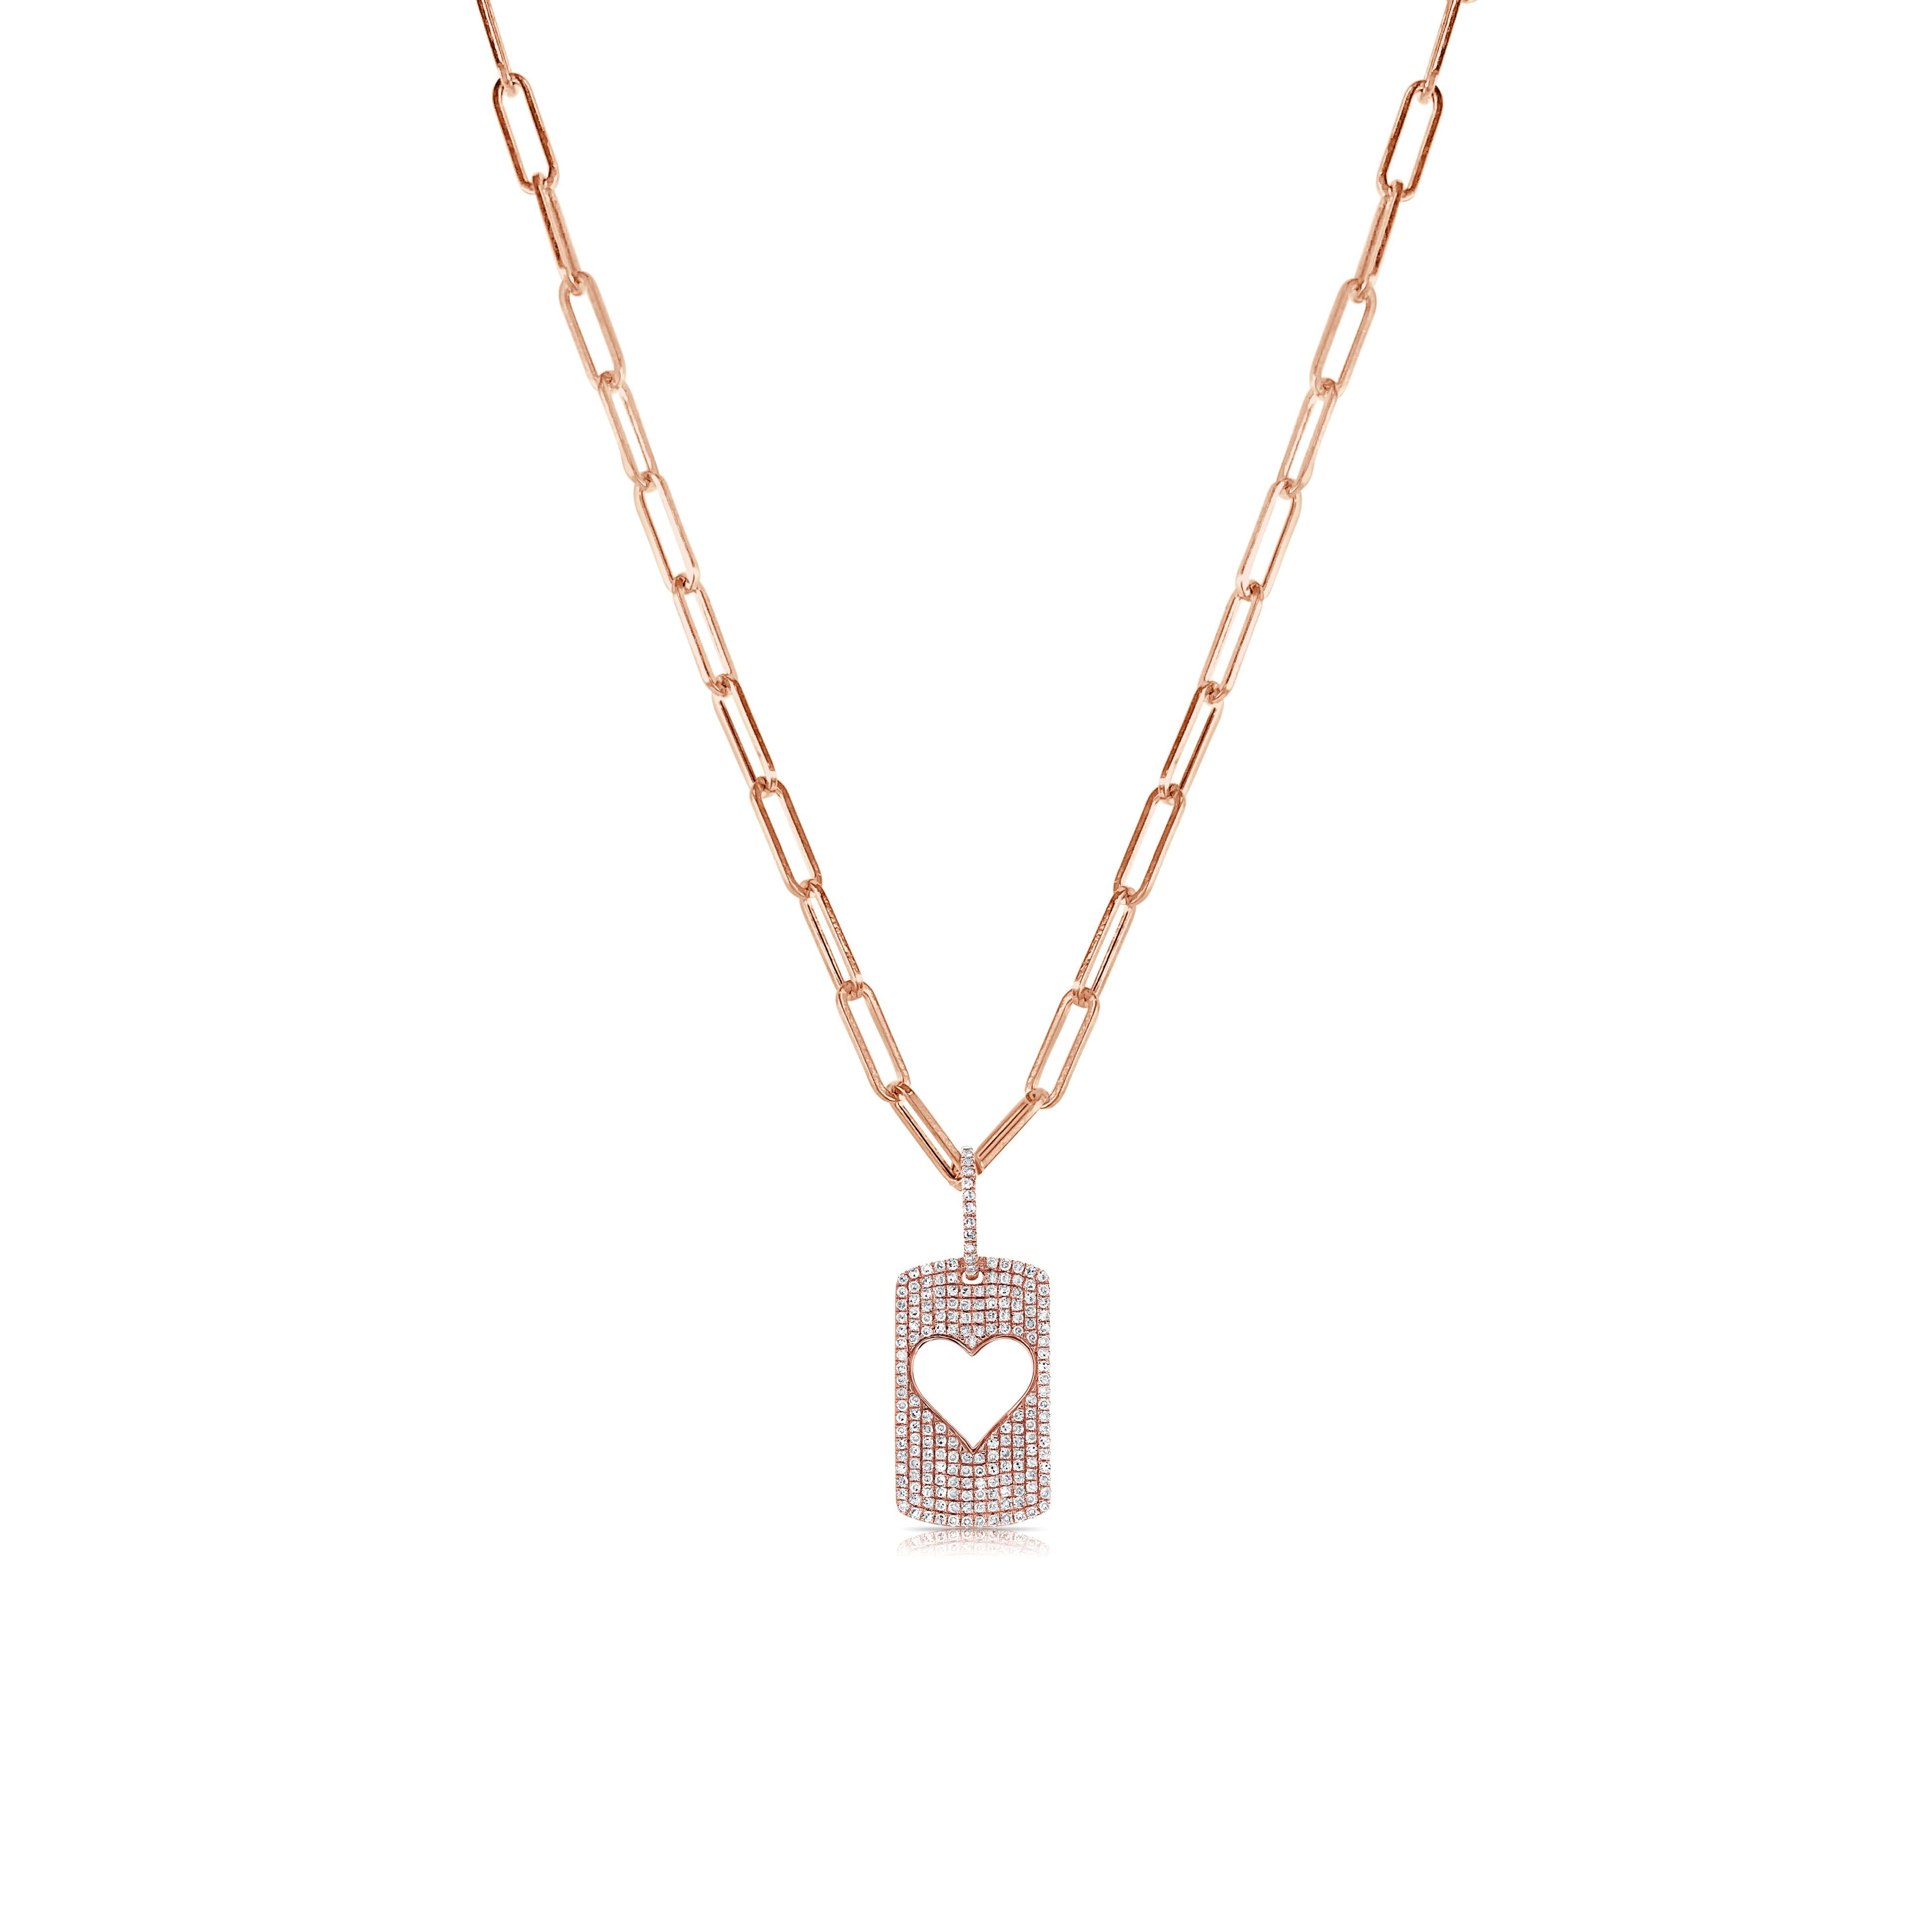 This stunning heart  charm necklace is beautifully crafted of 14k yellow gold and features 0.45 ct. of round-cut white sparkly diamonds. The pendant is hung from an 18-inch link chain that secures with a lobster clasp. 

-14K Gold
-0.45cts Natural